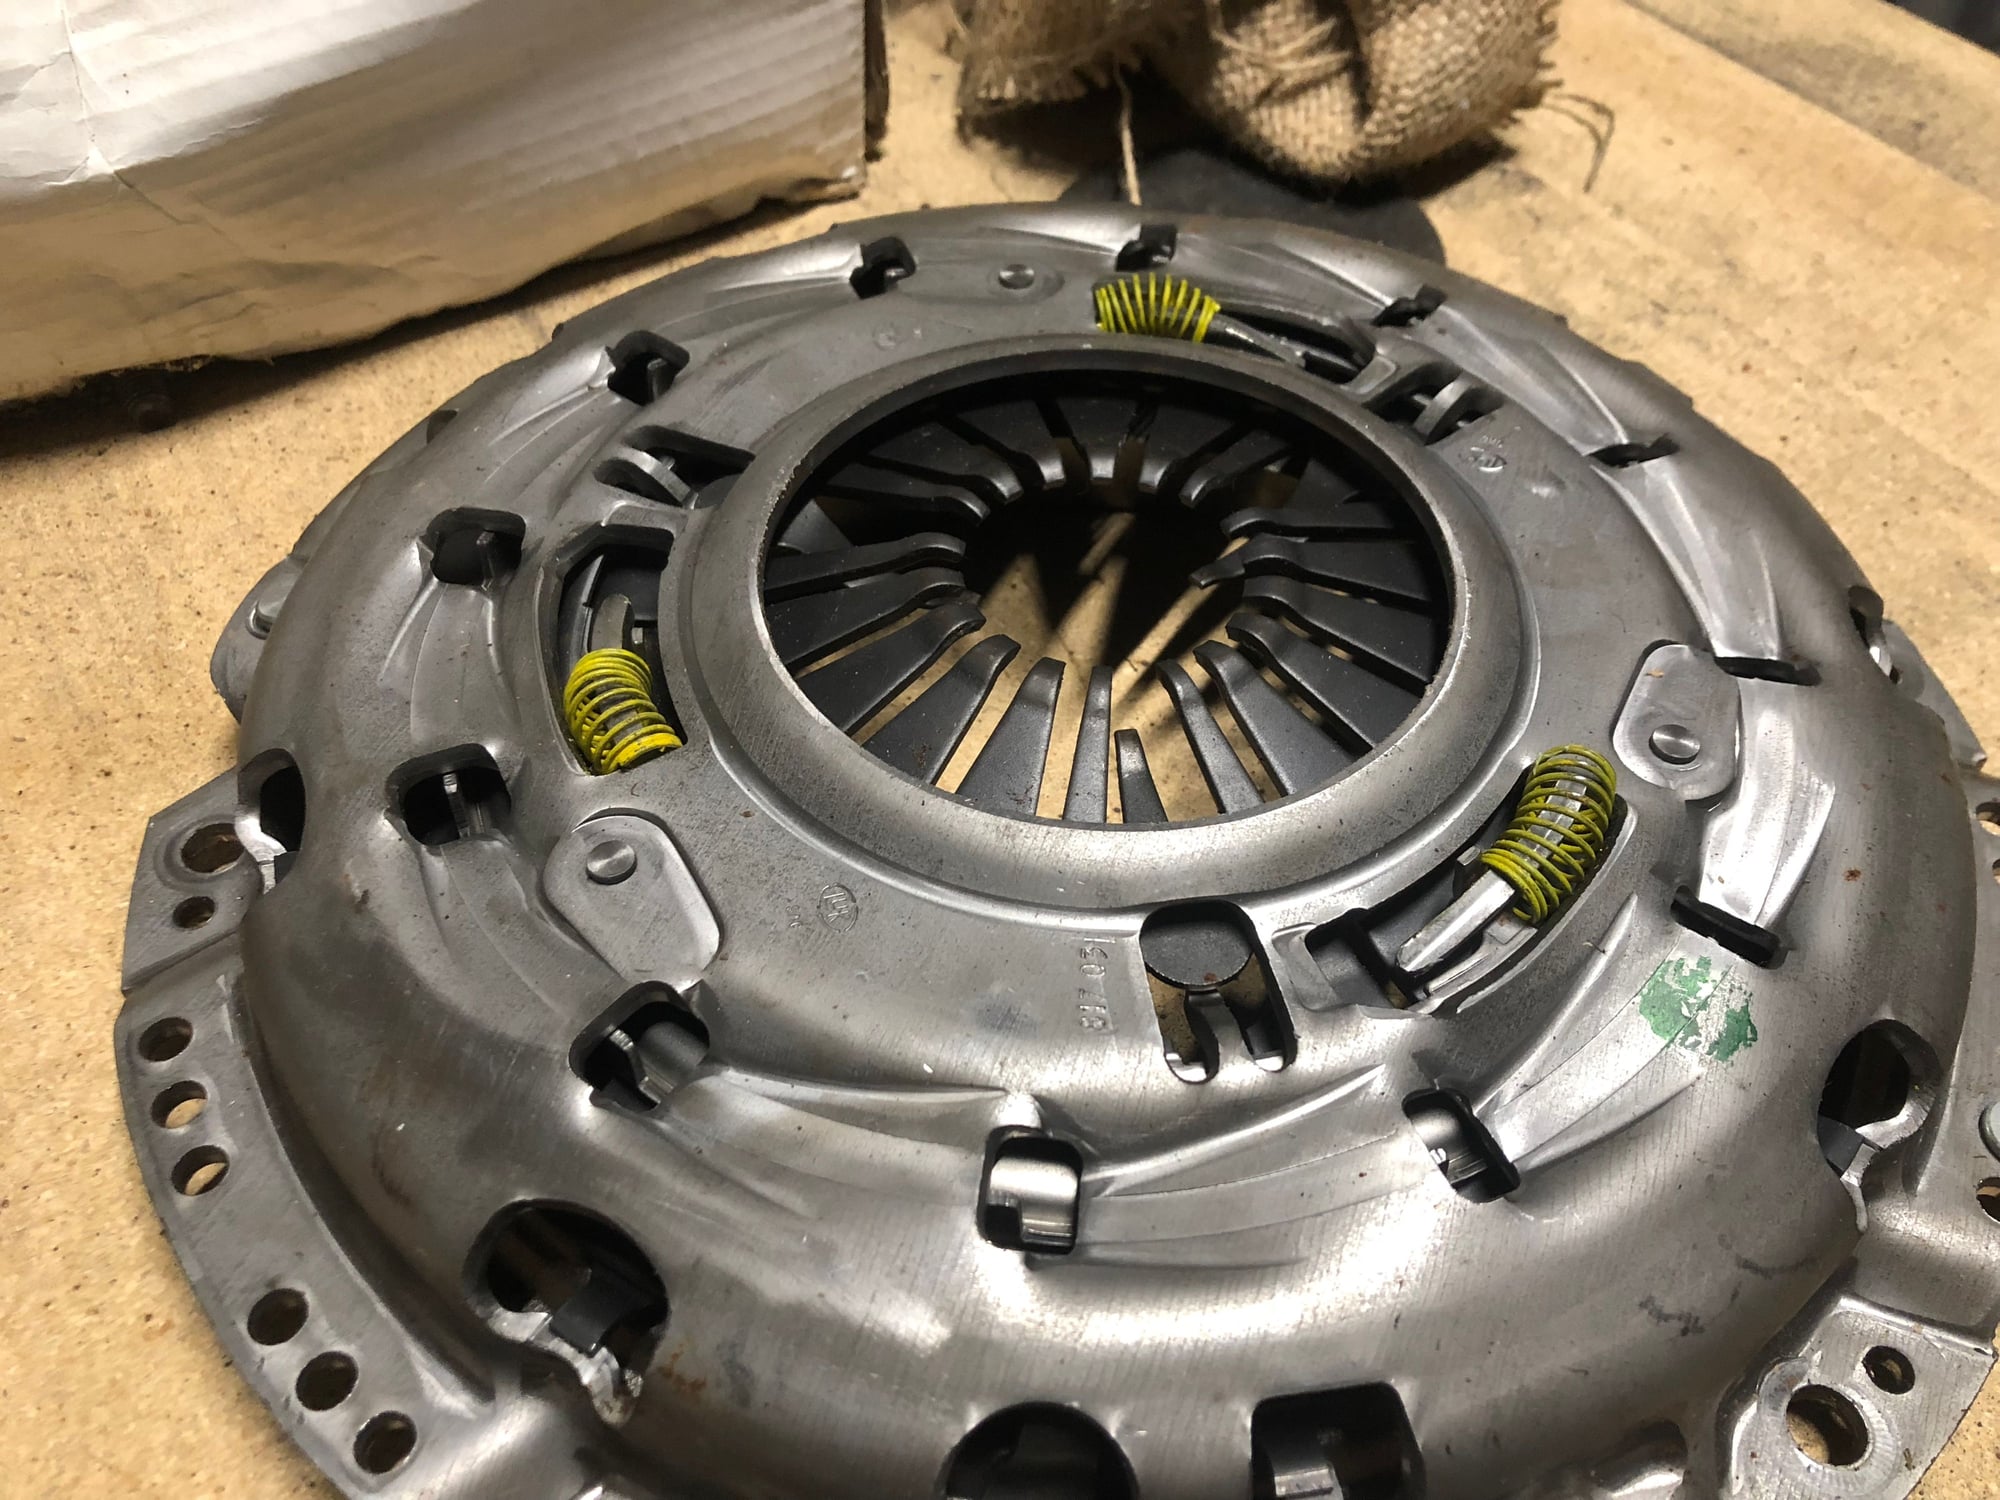  - LS7 clutch and flywheel - Penacook, NH 03303, United States